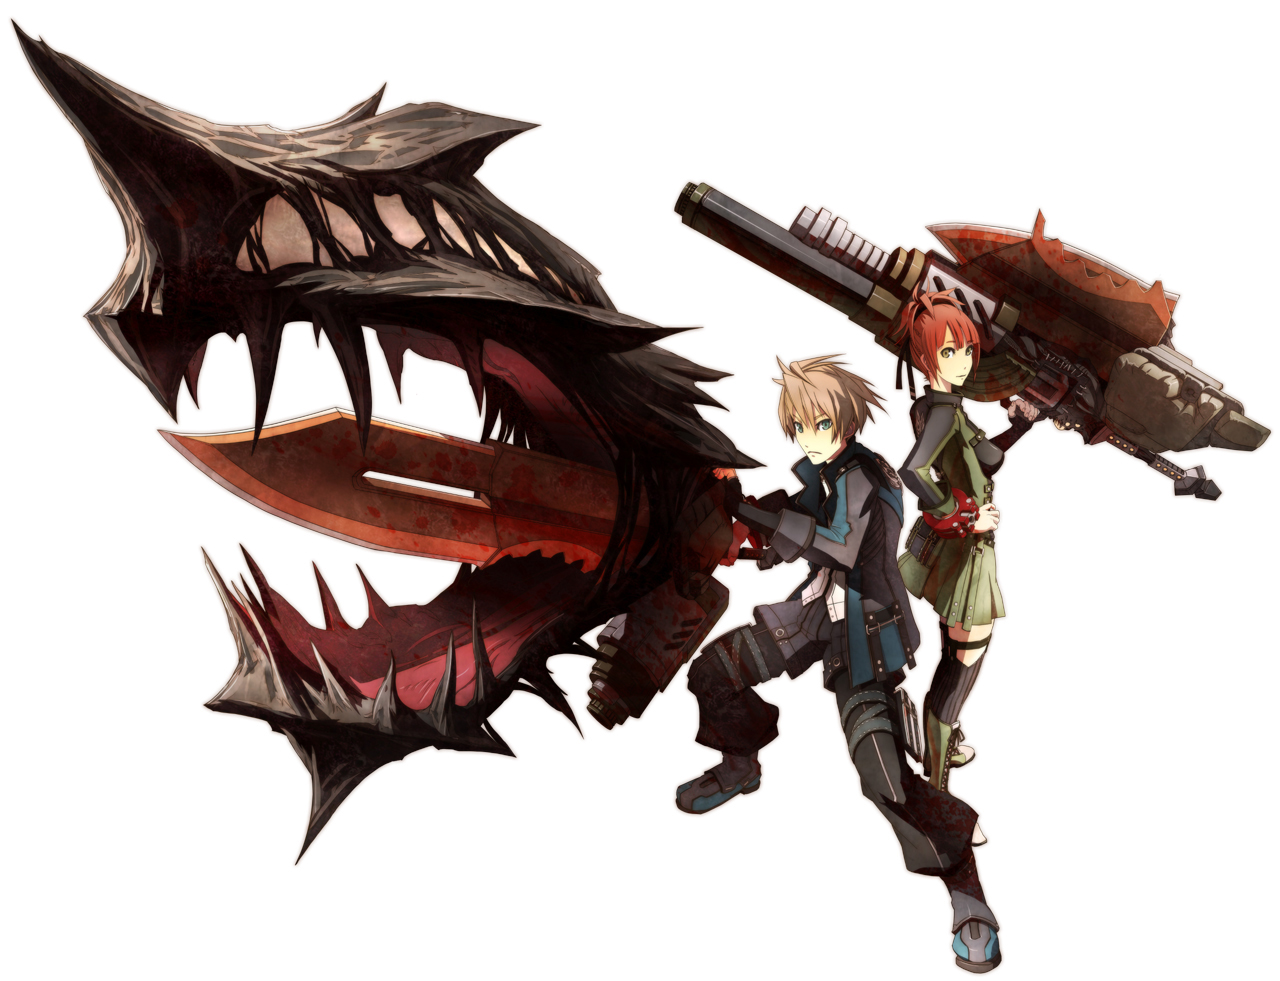 God Eater 3 Version 2.20 Update Has Just Launched With Features